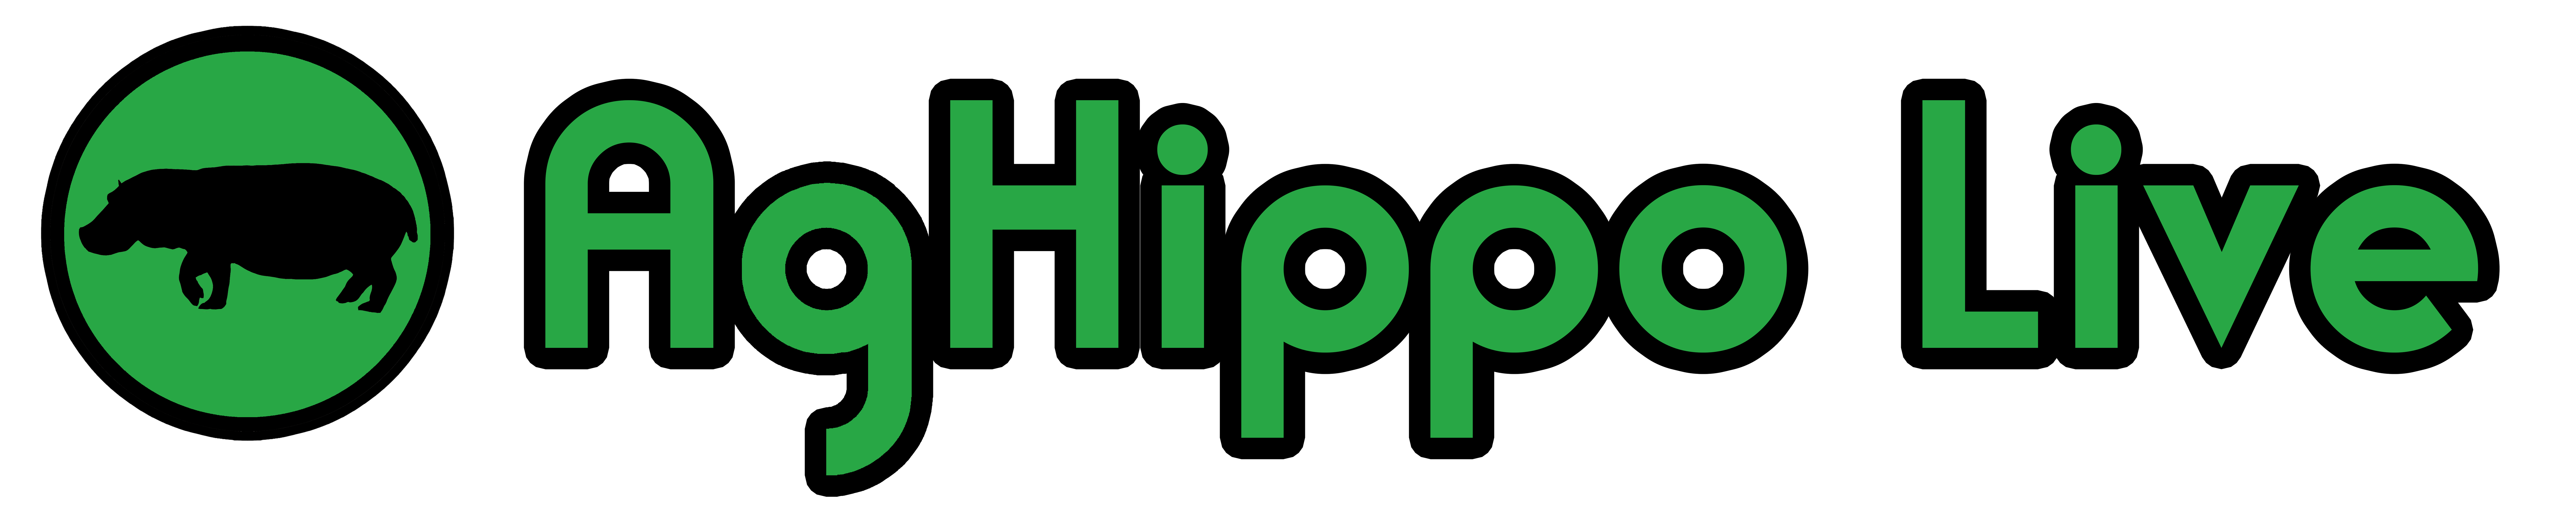 aghippo-live-logo_green